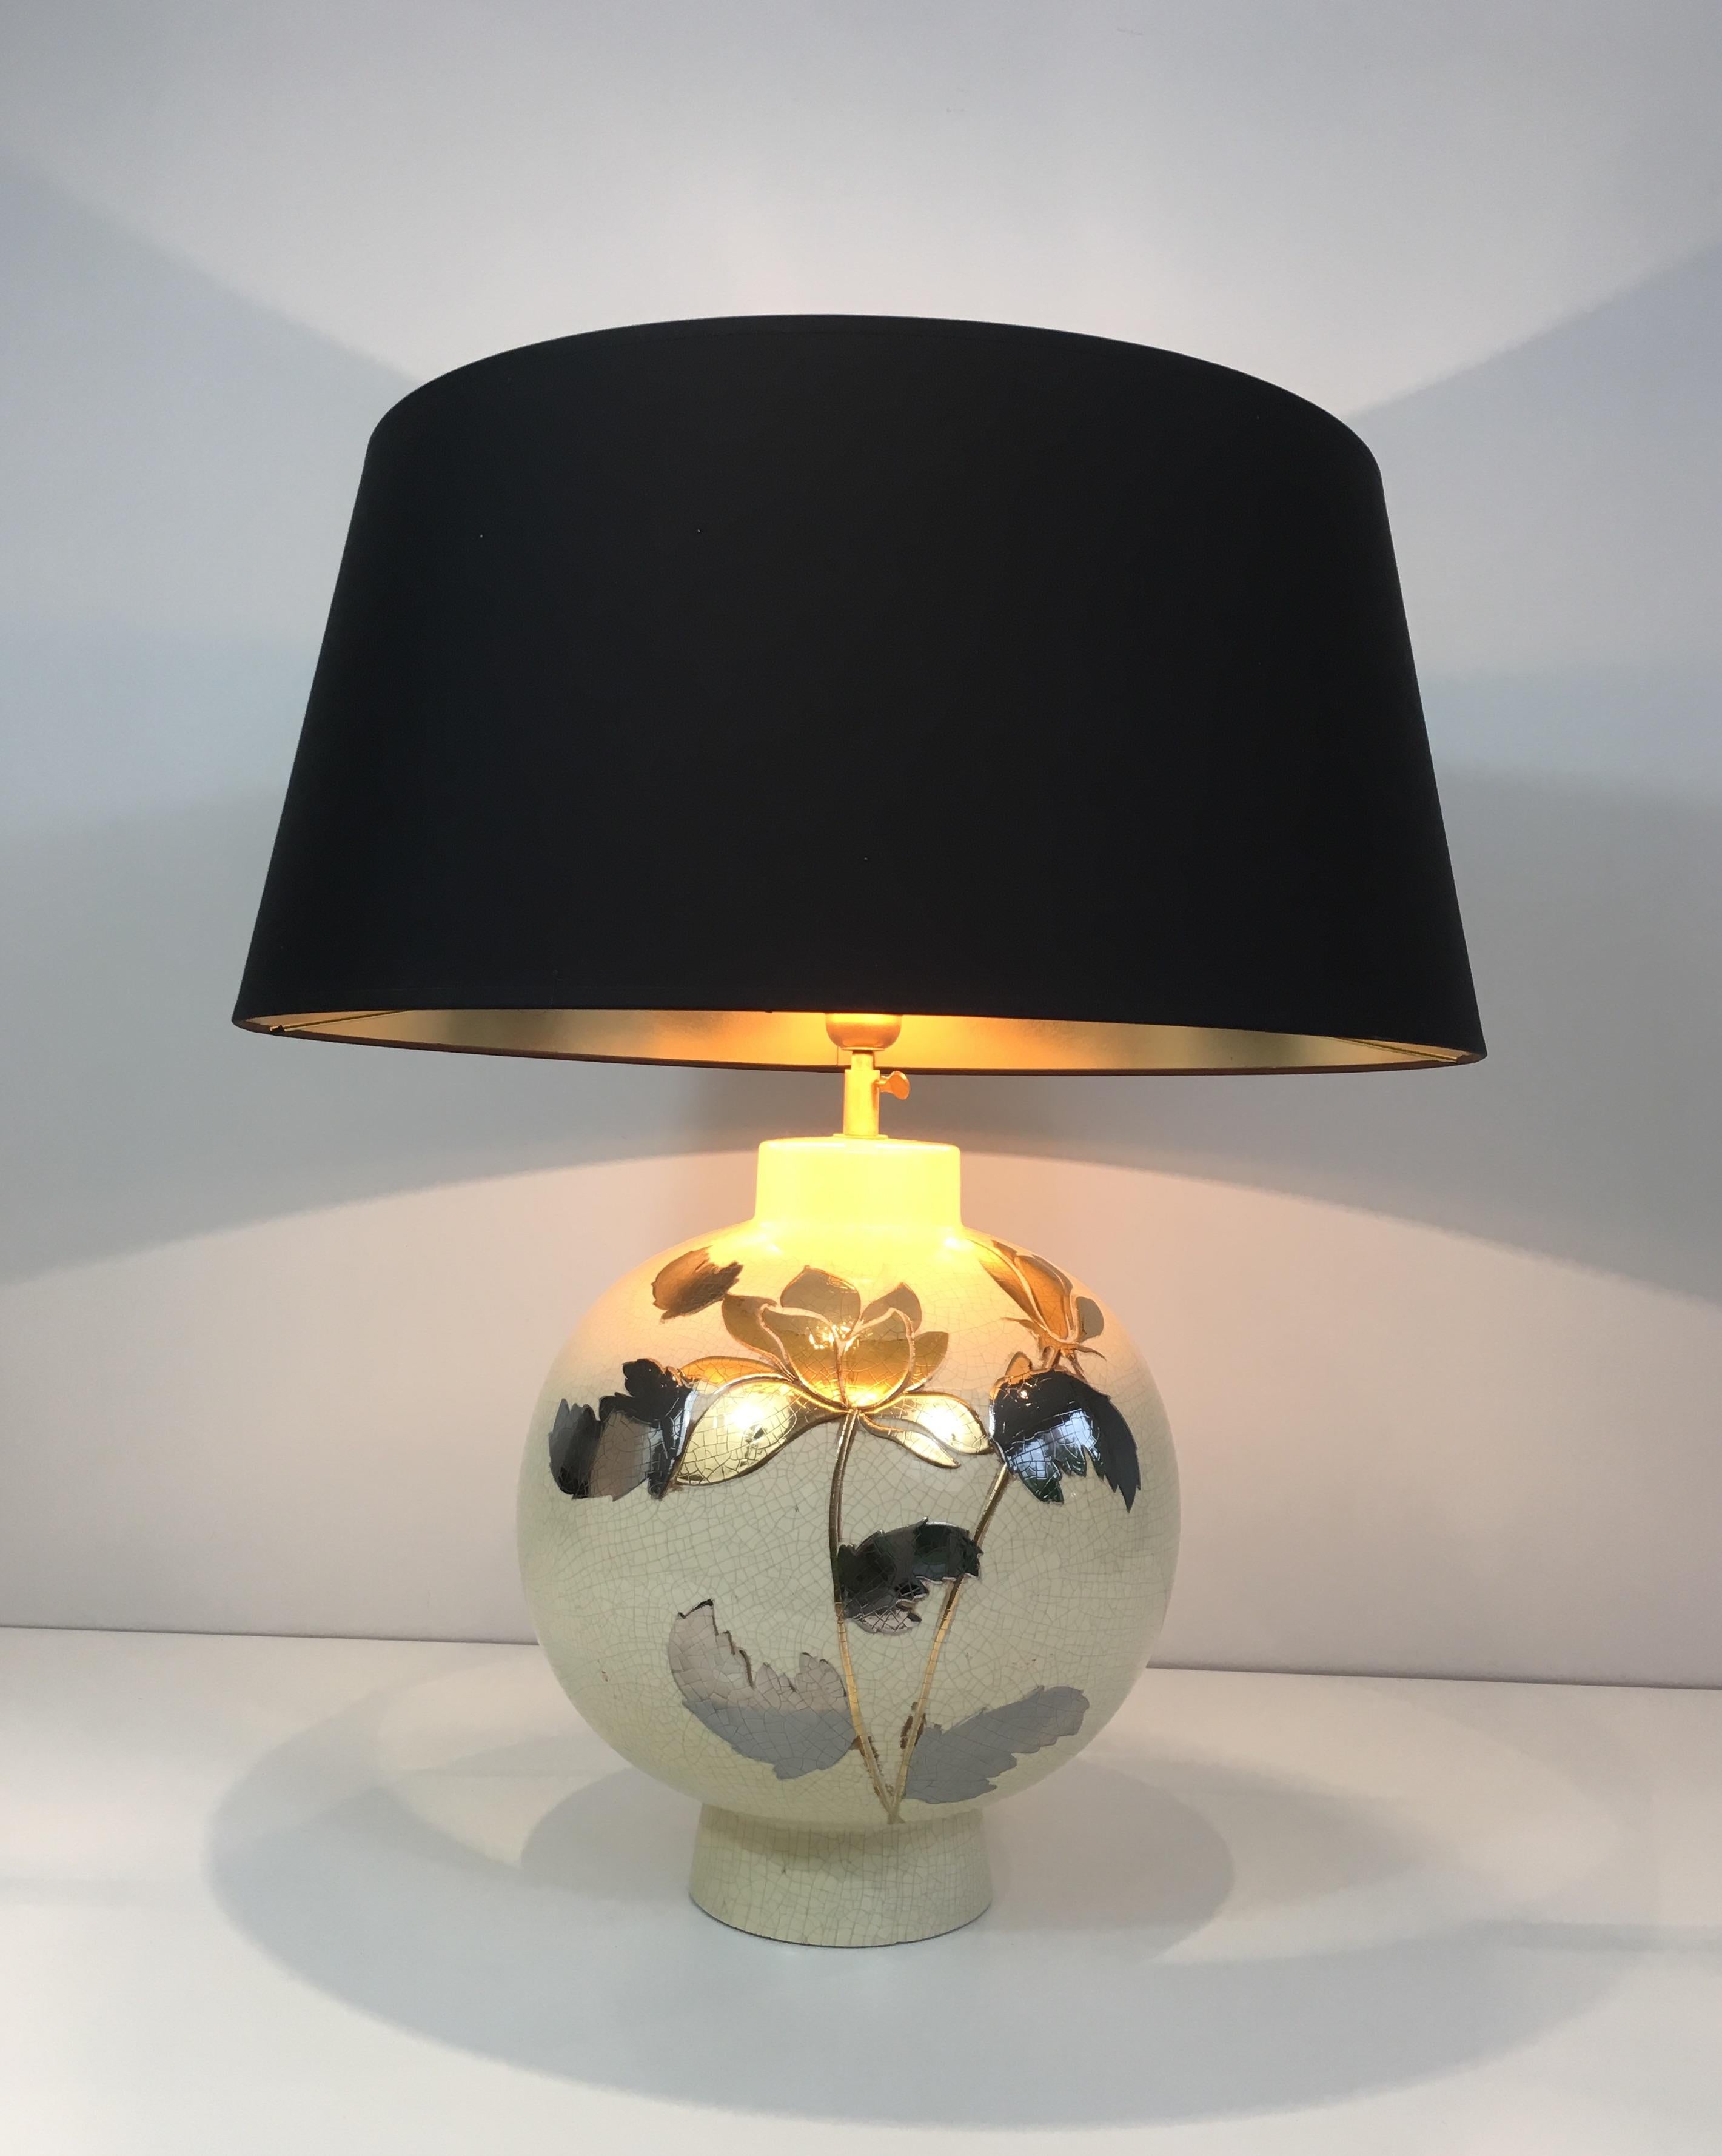 By L Drummer, Cracked Ceramic Lamp with Silver and Gold Flower Decoration on the 11